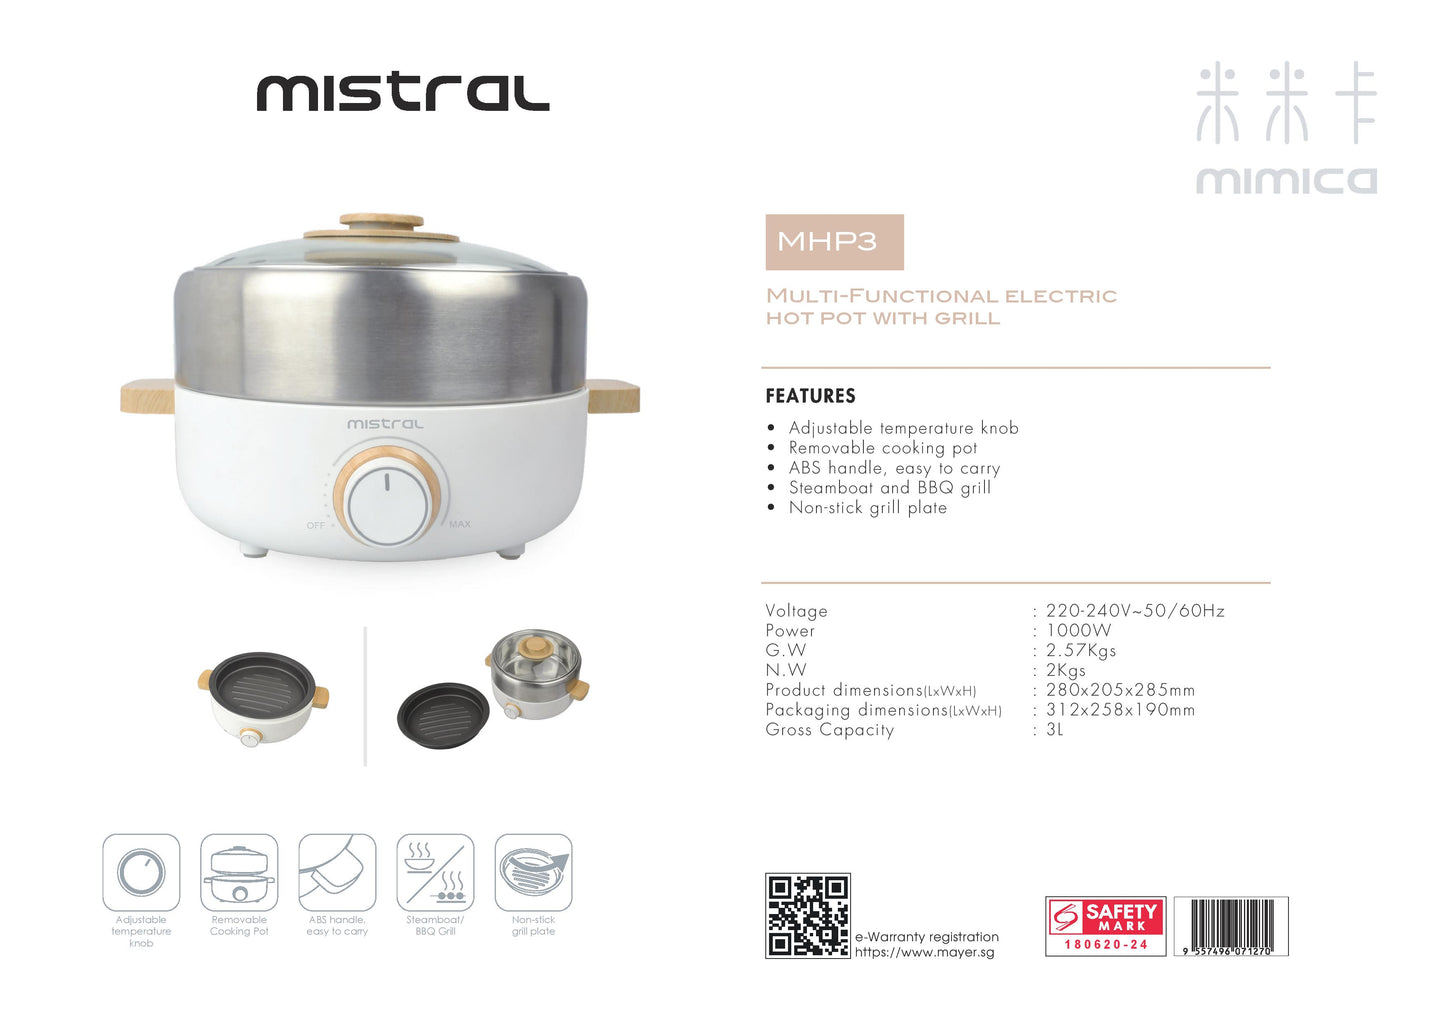 Mistral MHP3 MIMICA Multi-Functional Electric Hot Pot with Grill